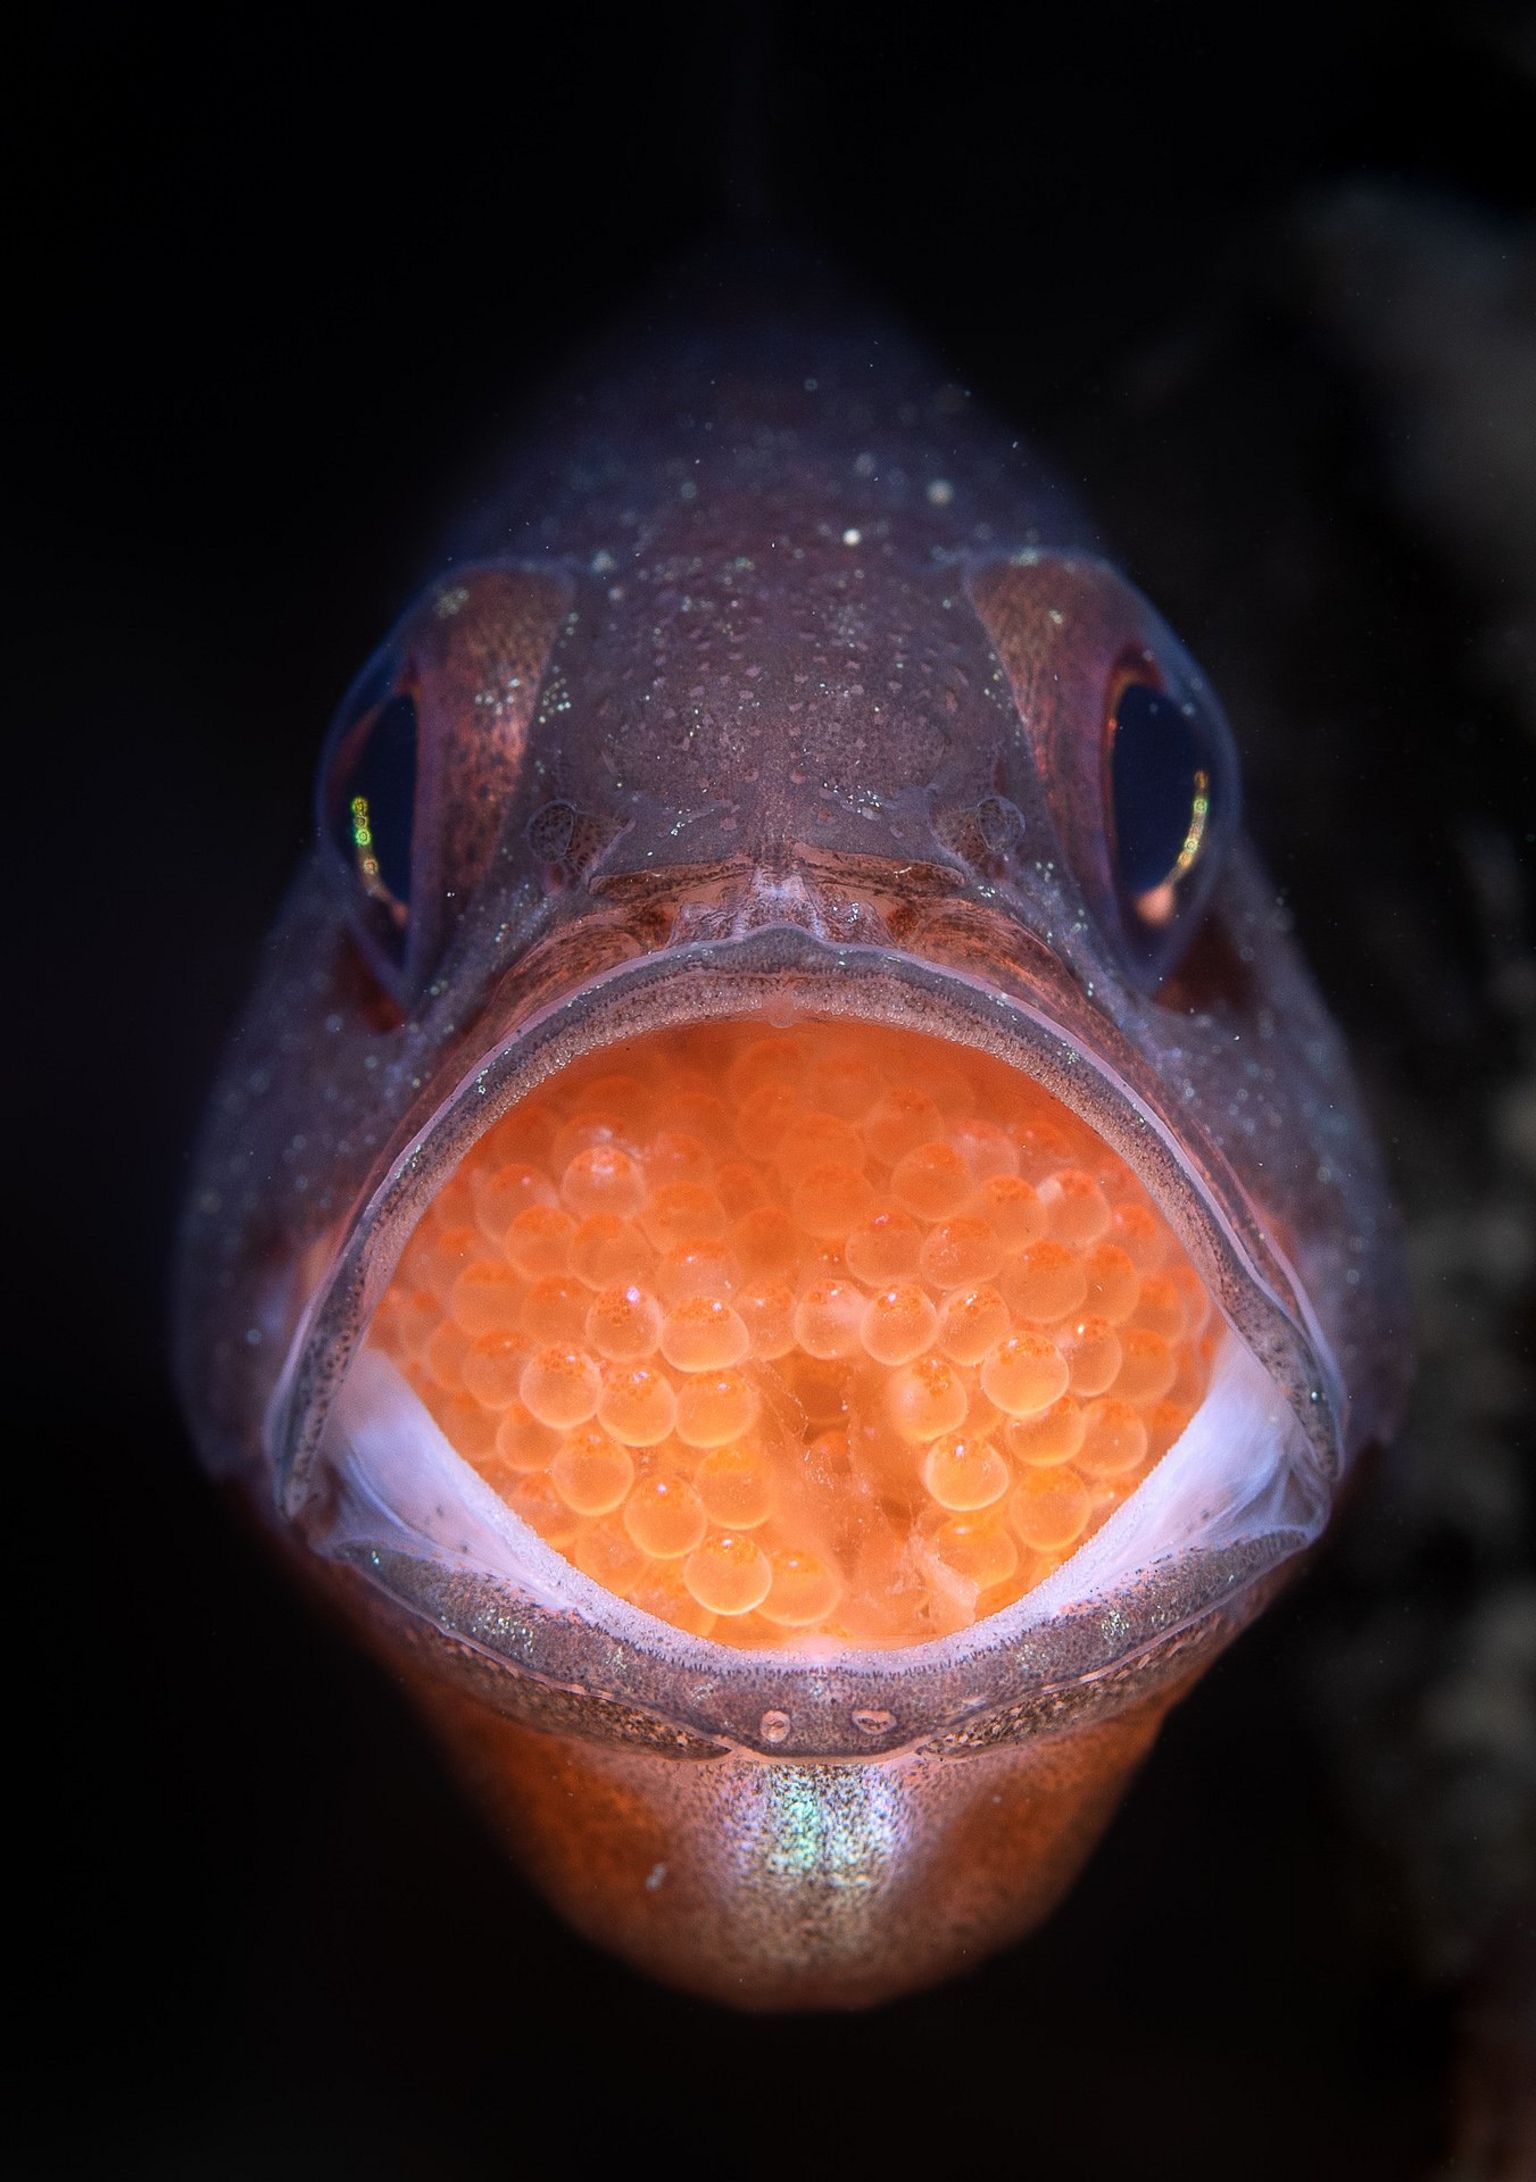 Eastern Gobbleguts fish carries eggs in its mouth.